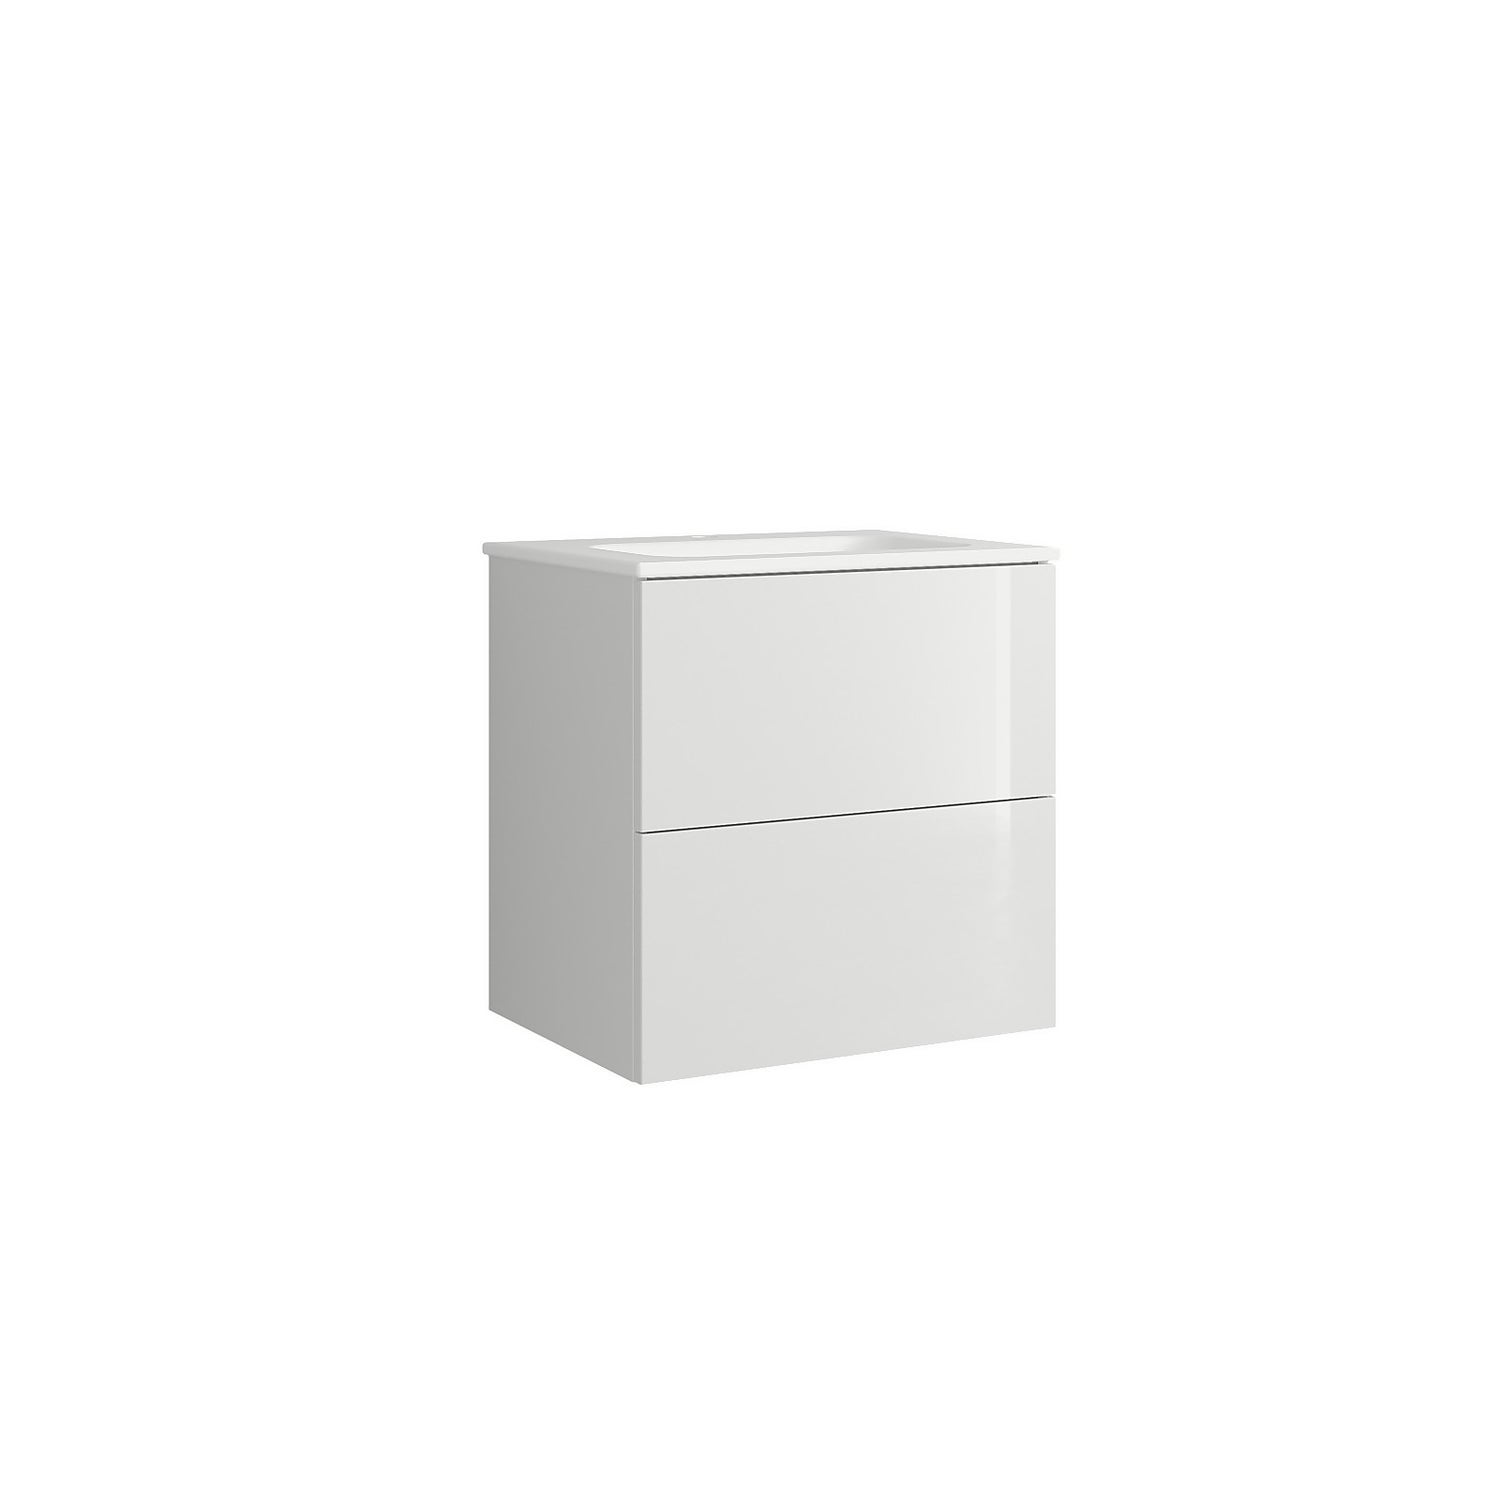 House Beautiful ele-ment(s) 600mm Wall Hung Vanity Unit with Basin - Gloss White